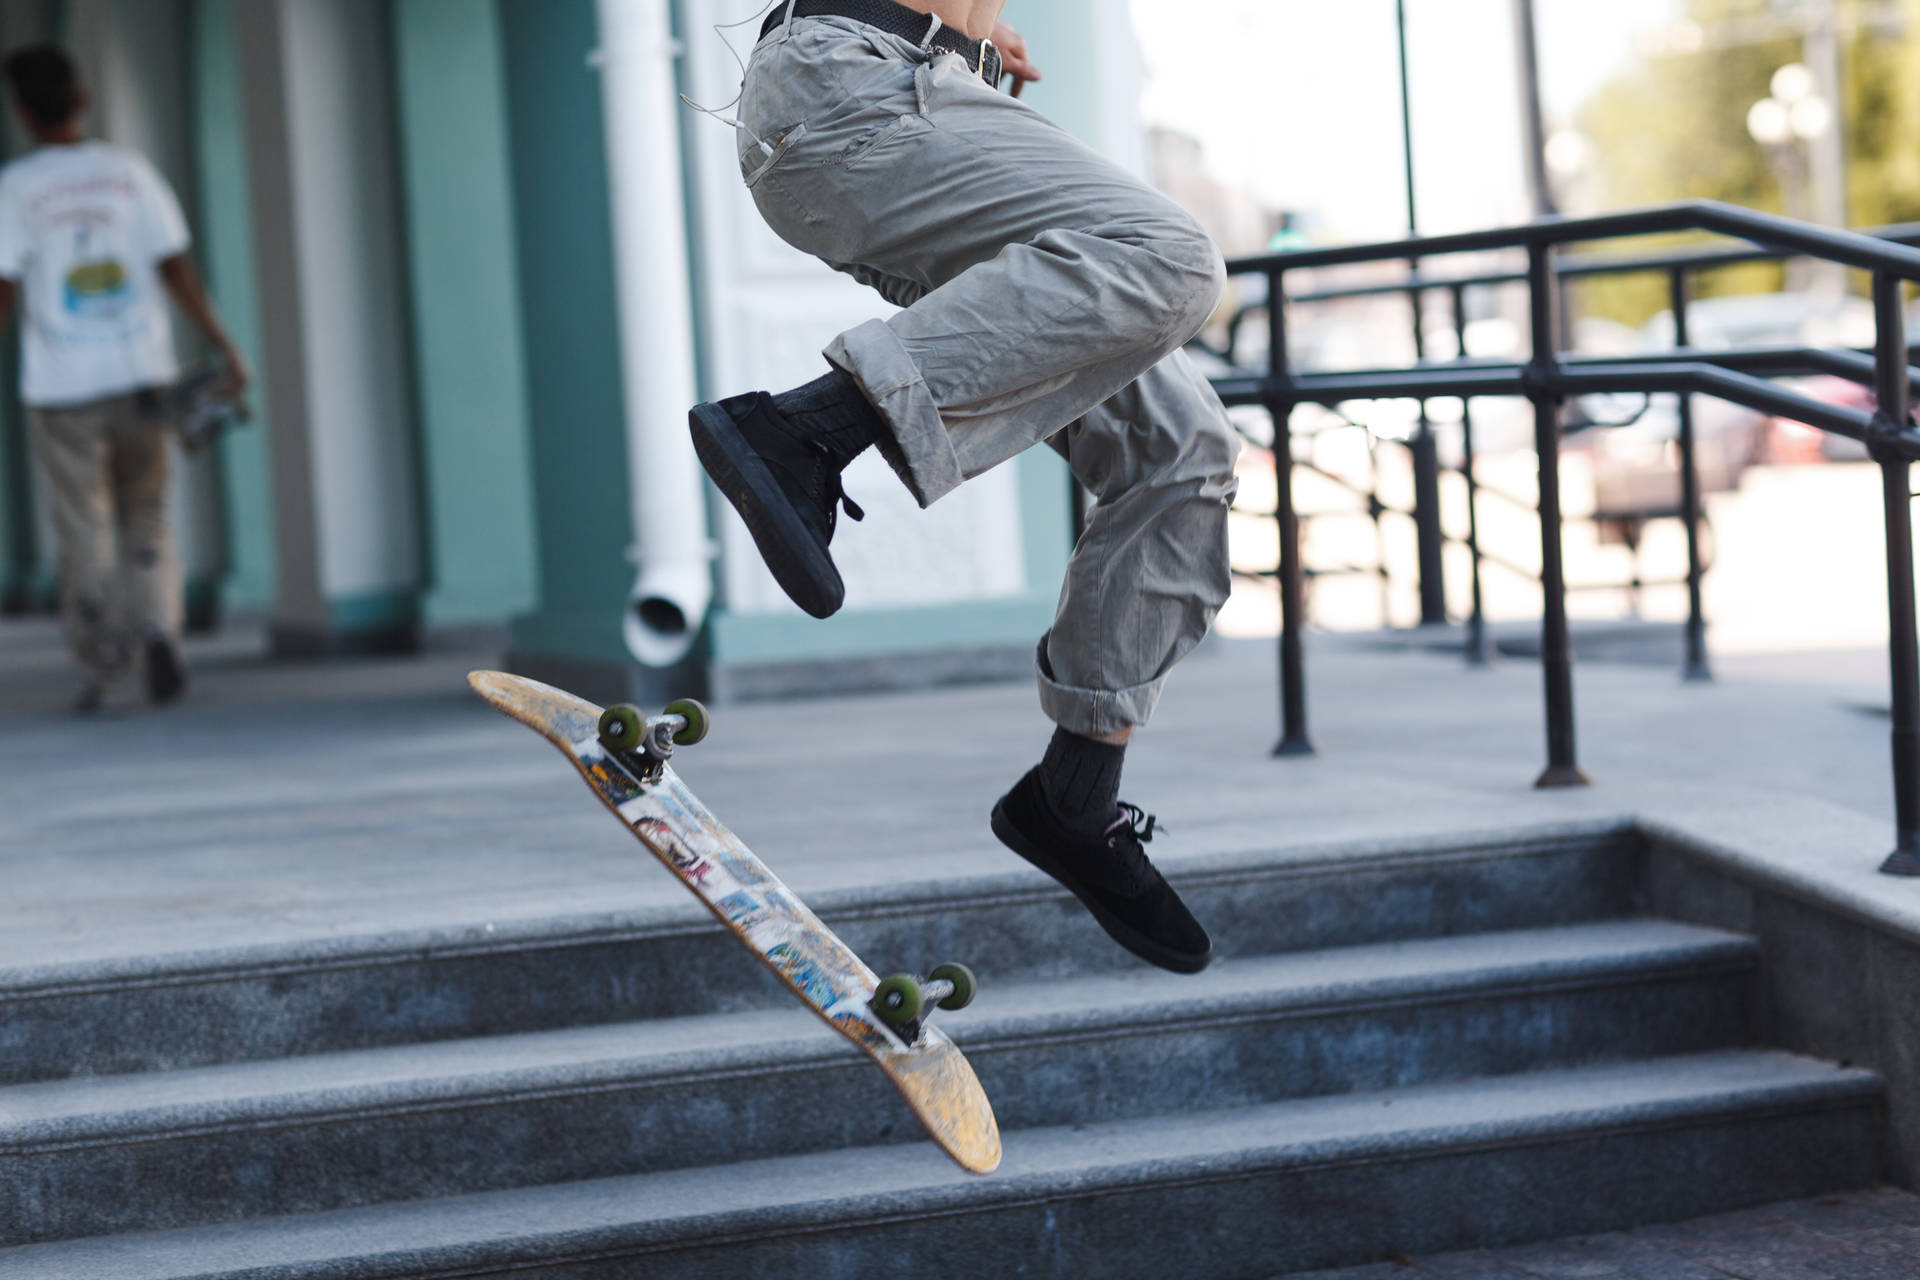 Achieve Amazing Feats With A Skateboard Background